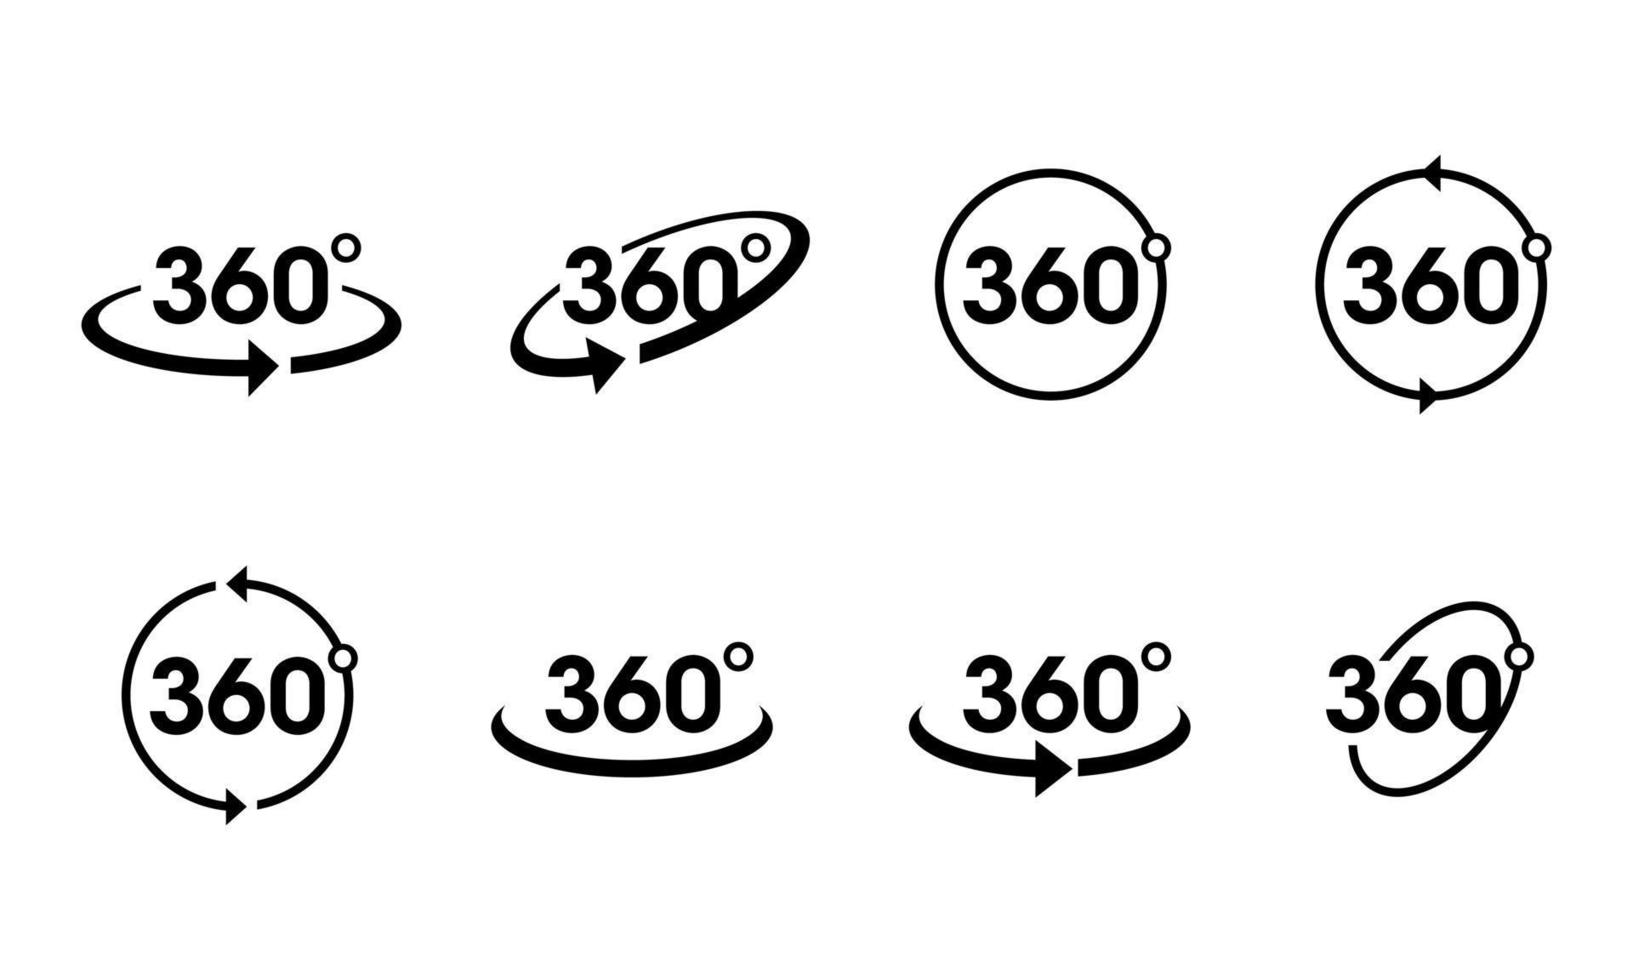 Icon set of 360-degree app for 360-area view and circular arrows in basic shape. 360 view icon collection for vr simulation. vector